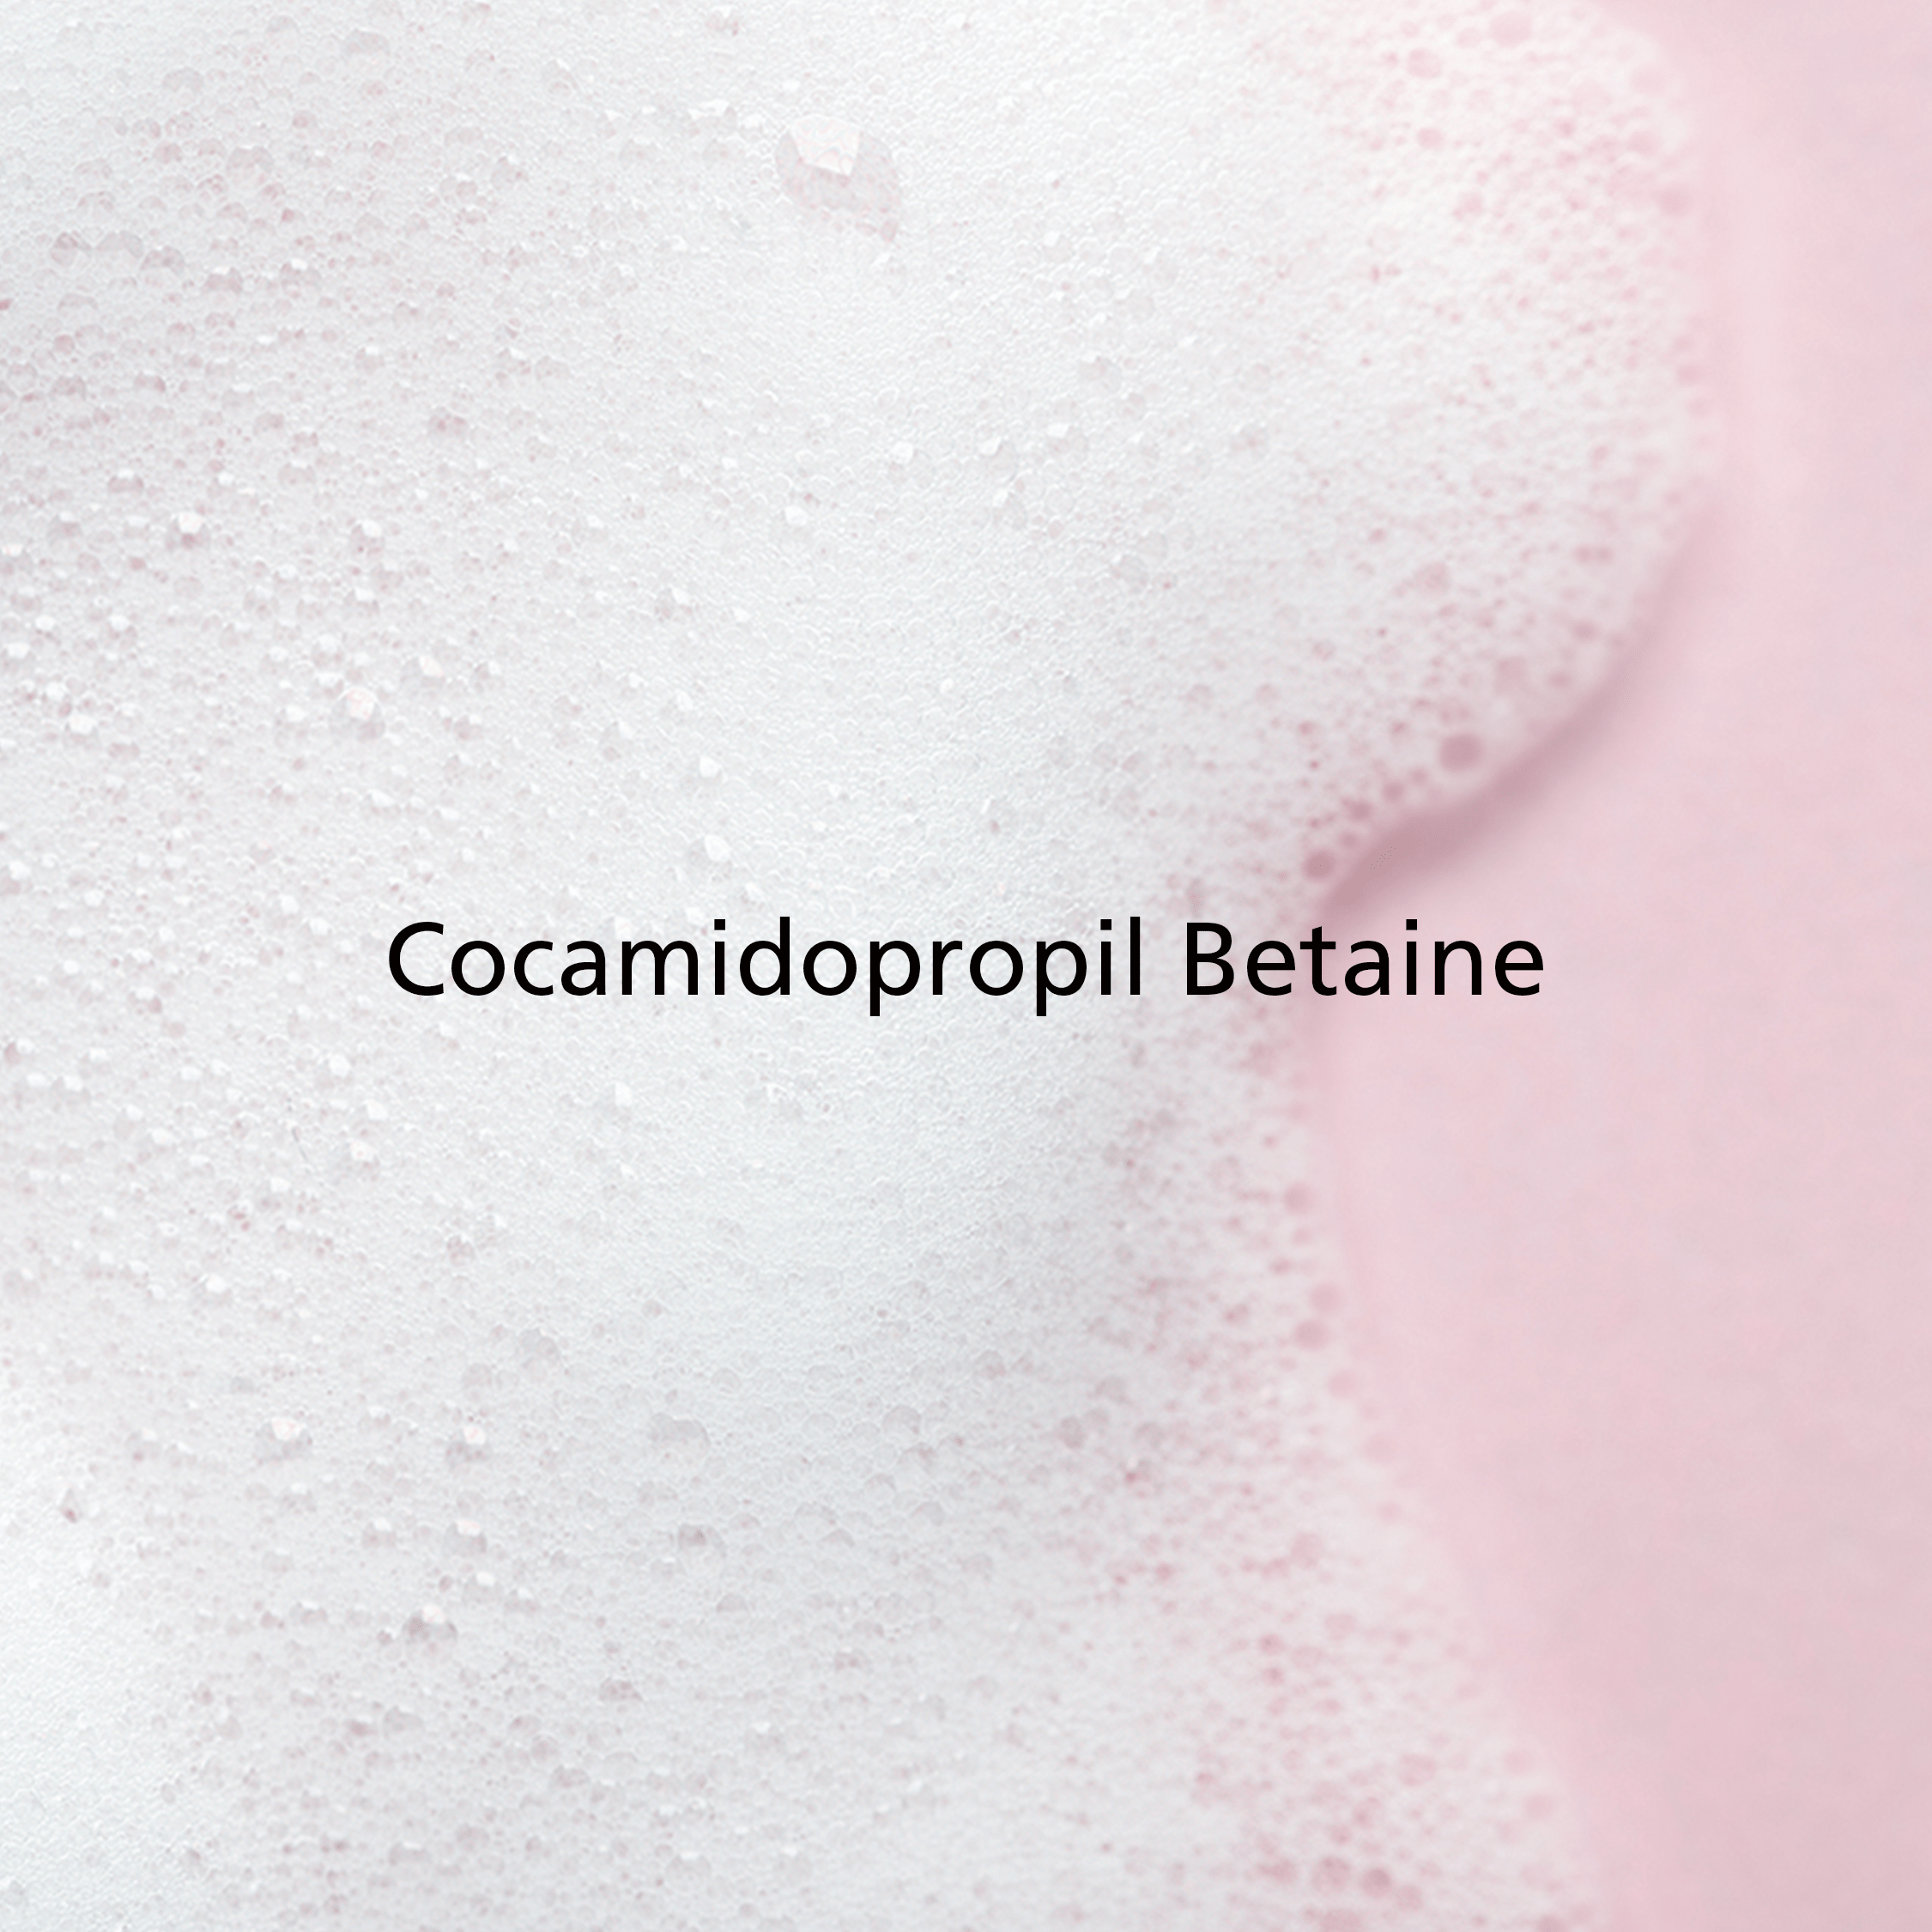 Cocamidopropil Betaine